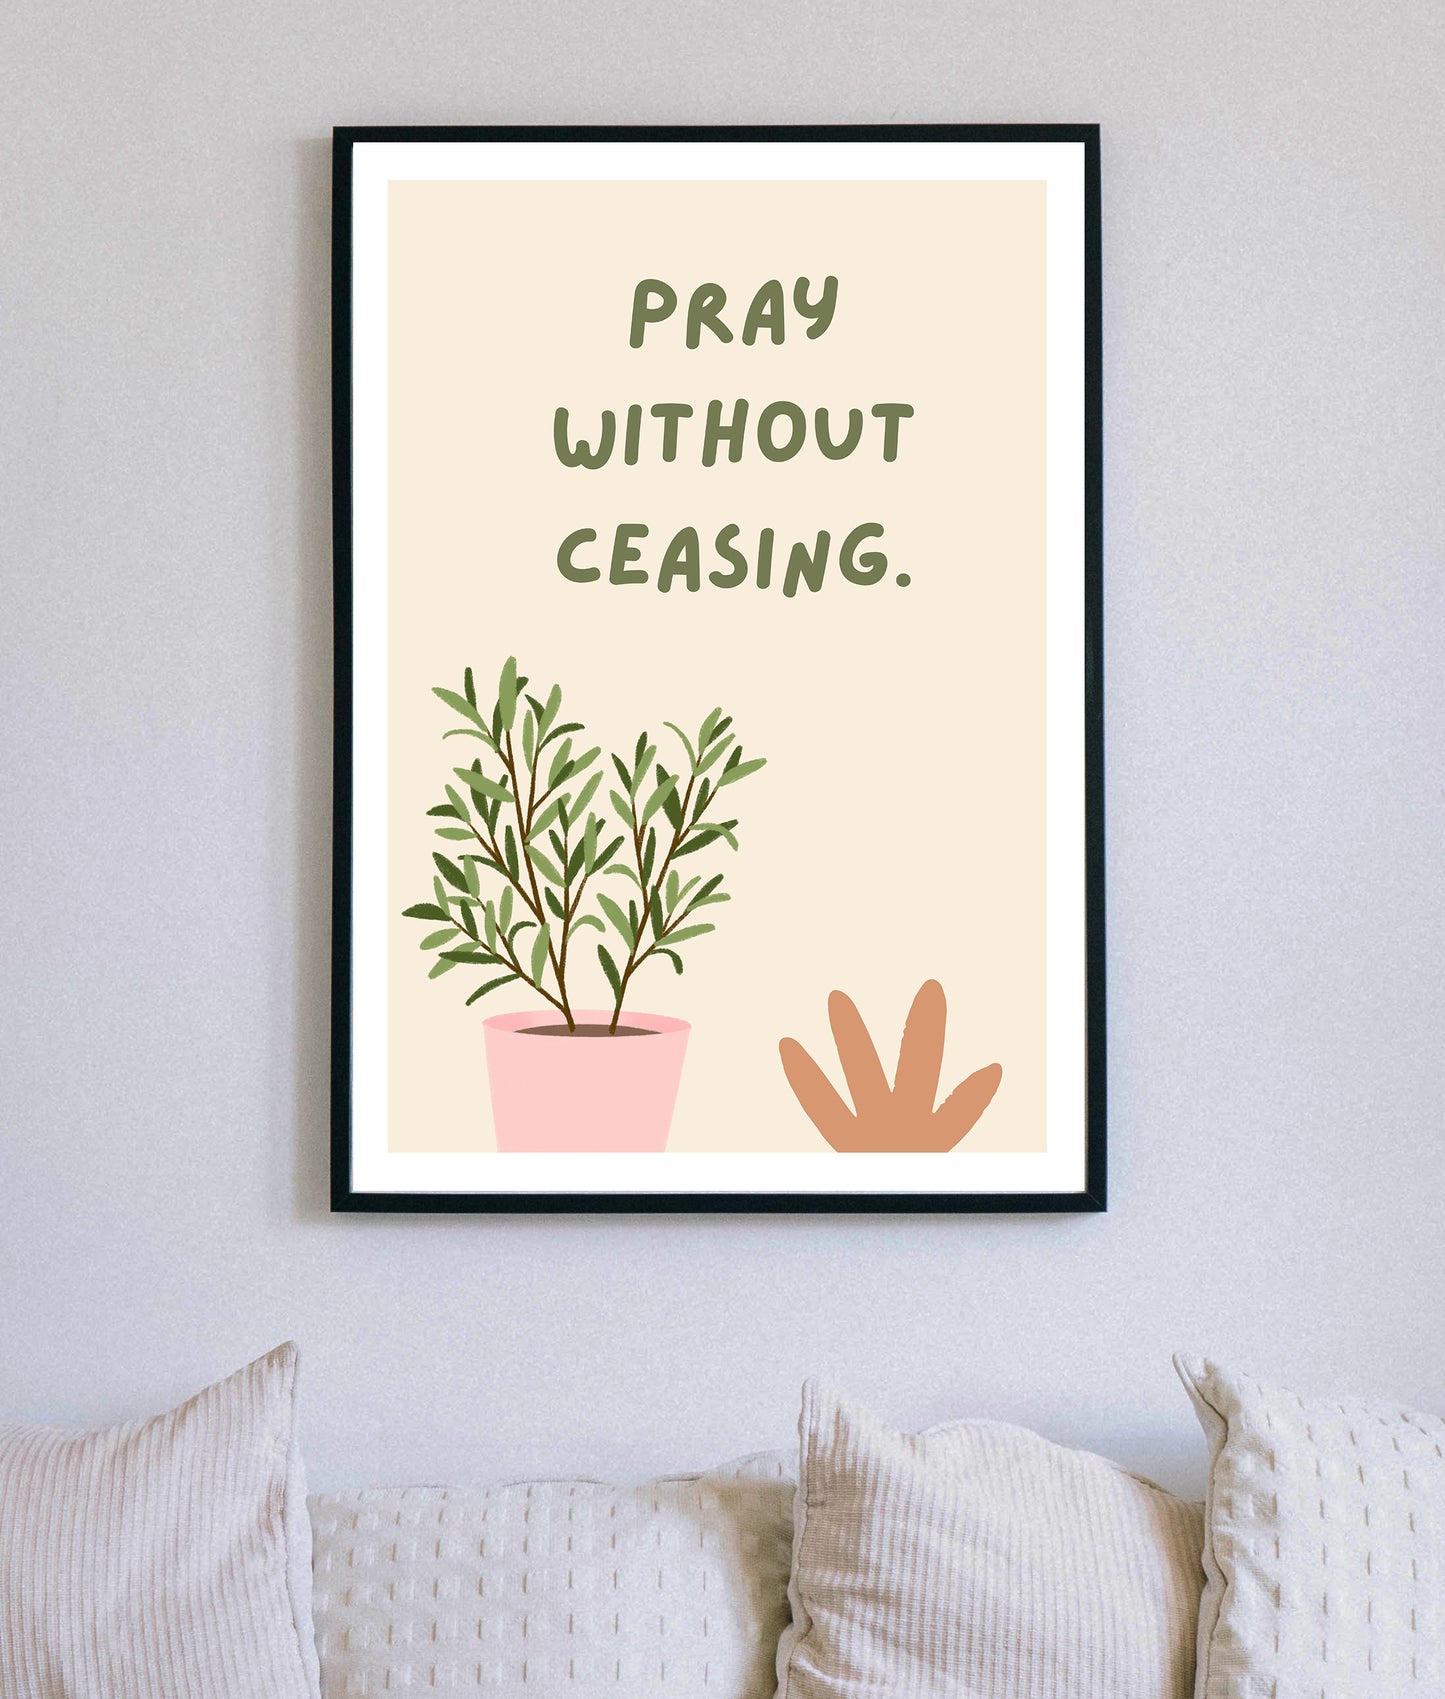 Pray Without Ceasing Christian Quote, Scripture, Bible Verse Poster Wall Art